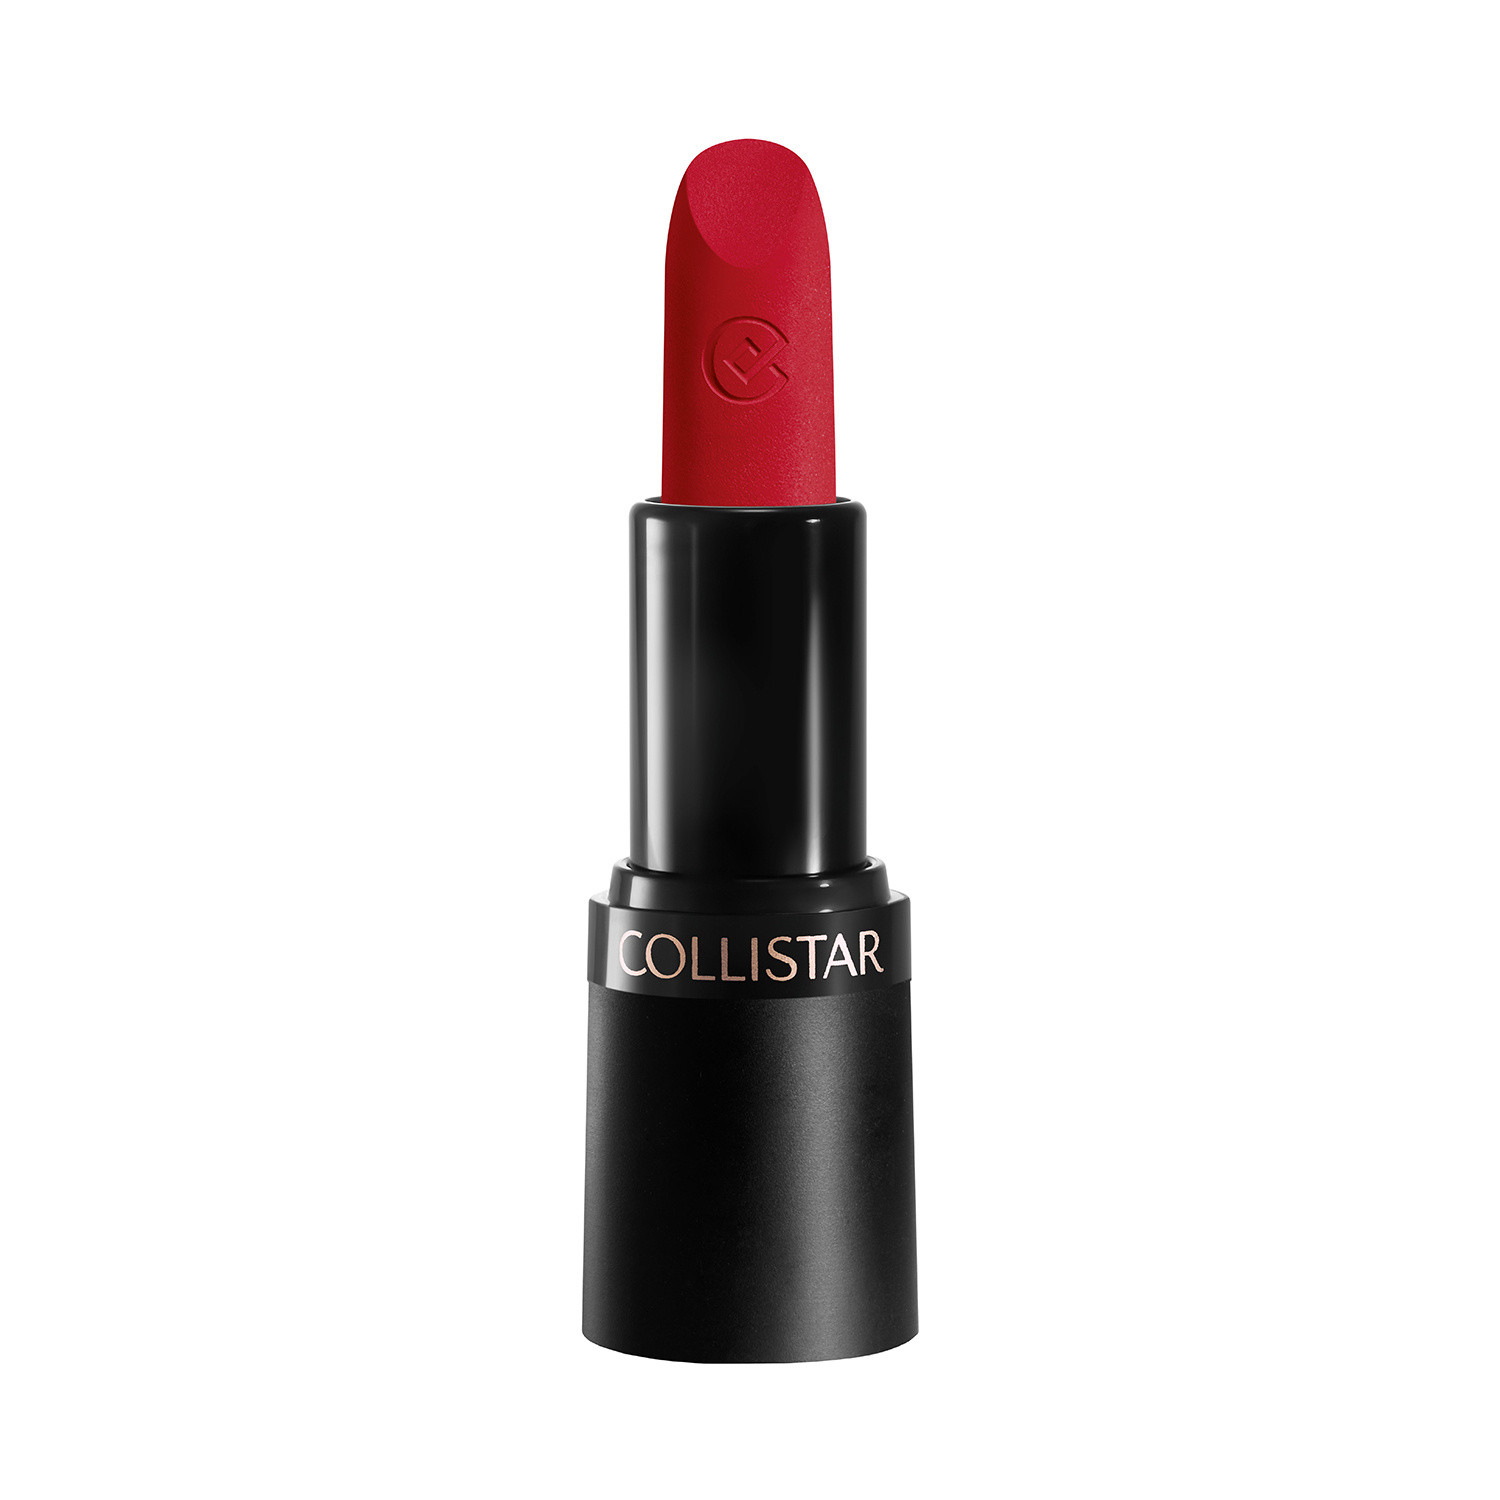 Collistar - Puro rossetto matte - 111 Rosso Milano, Rosso fragola, large image number 0